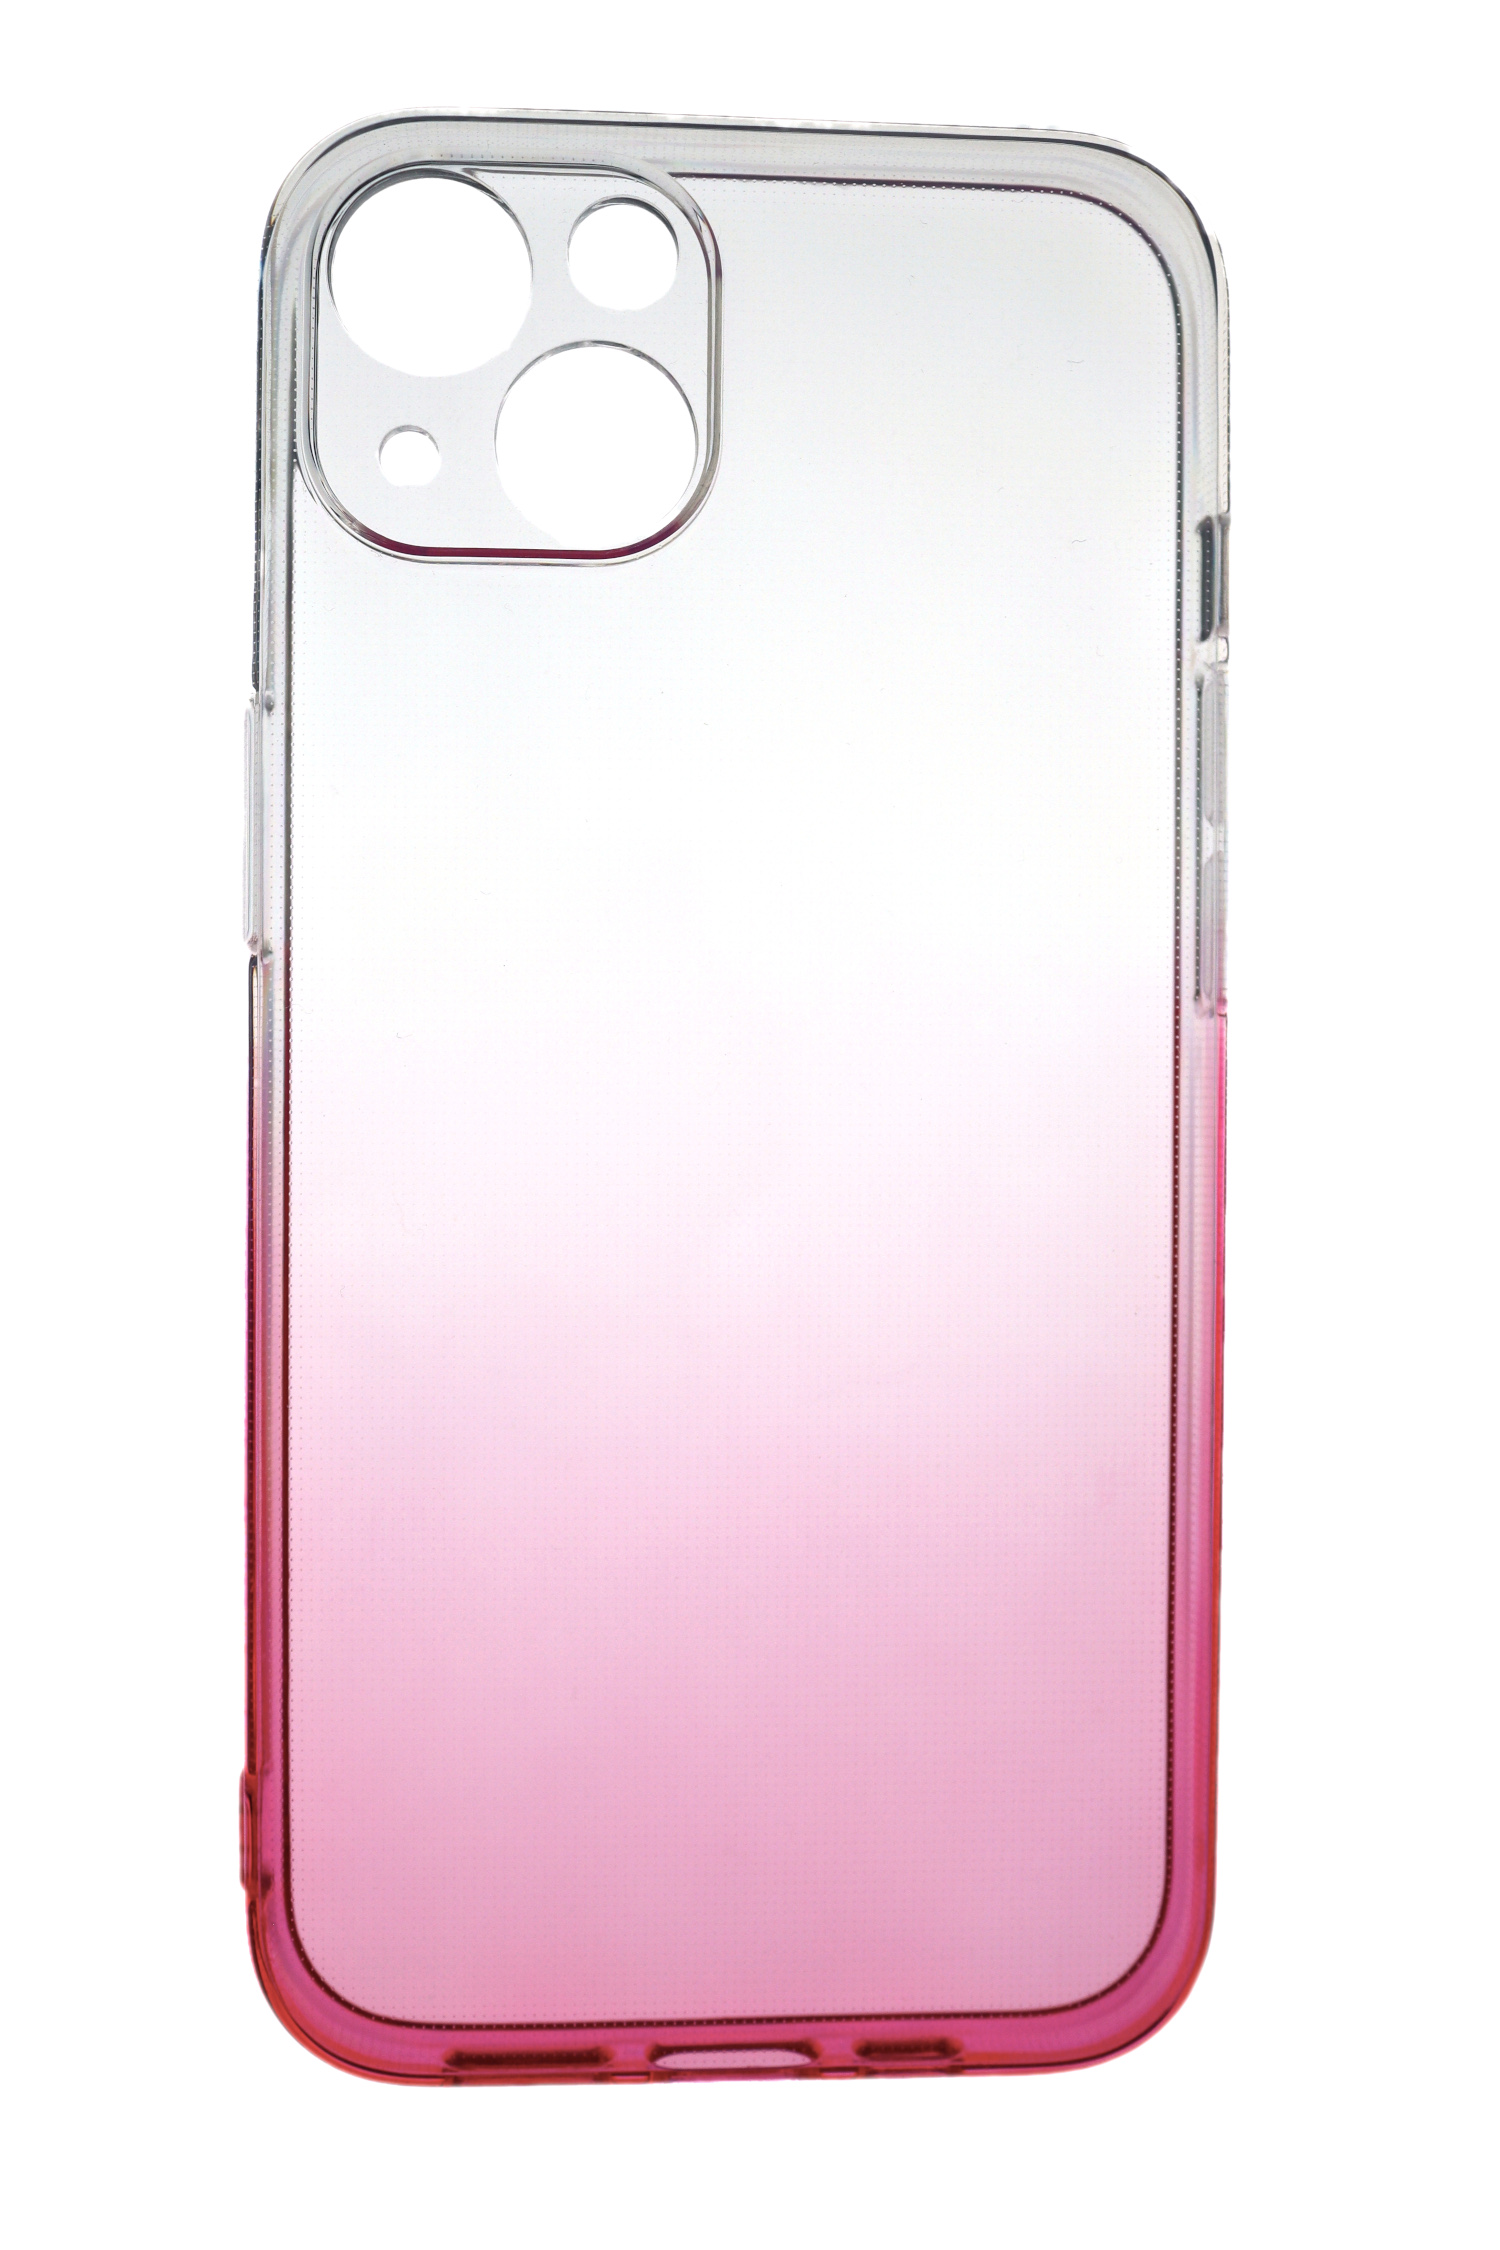 JAMCOVER 2.0 mm TPU Apple, Backcover, Case iPhone Strong, Pink, Transparent 14